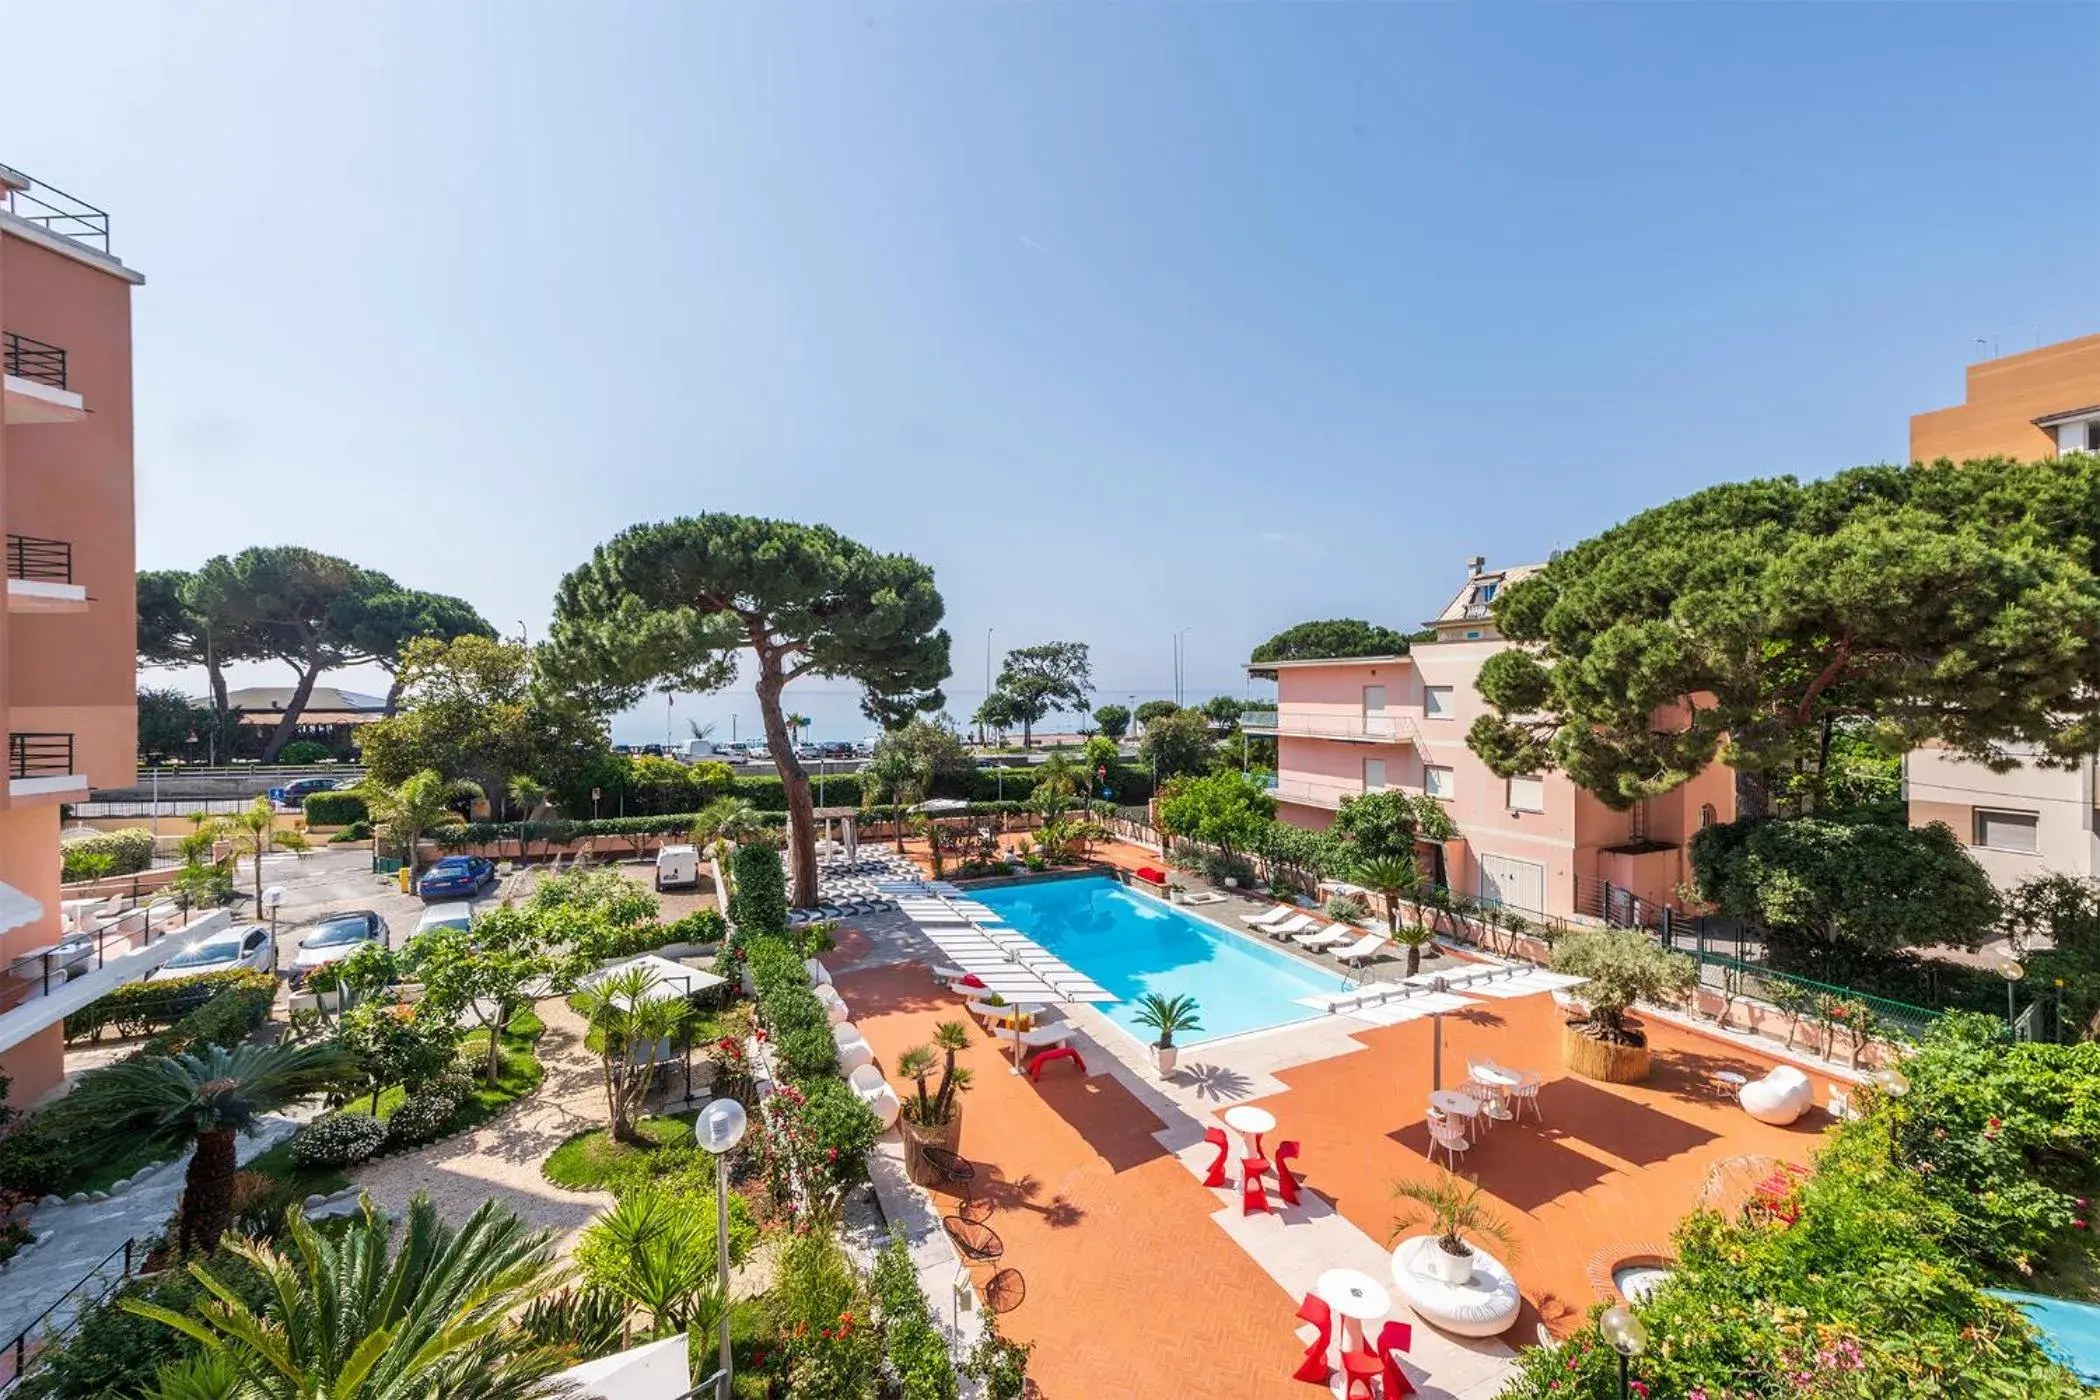 Property building, Pool View in Hotel San Michele